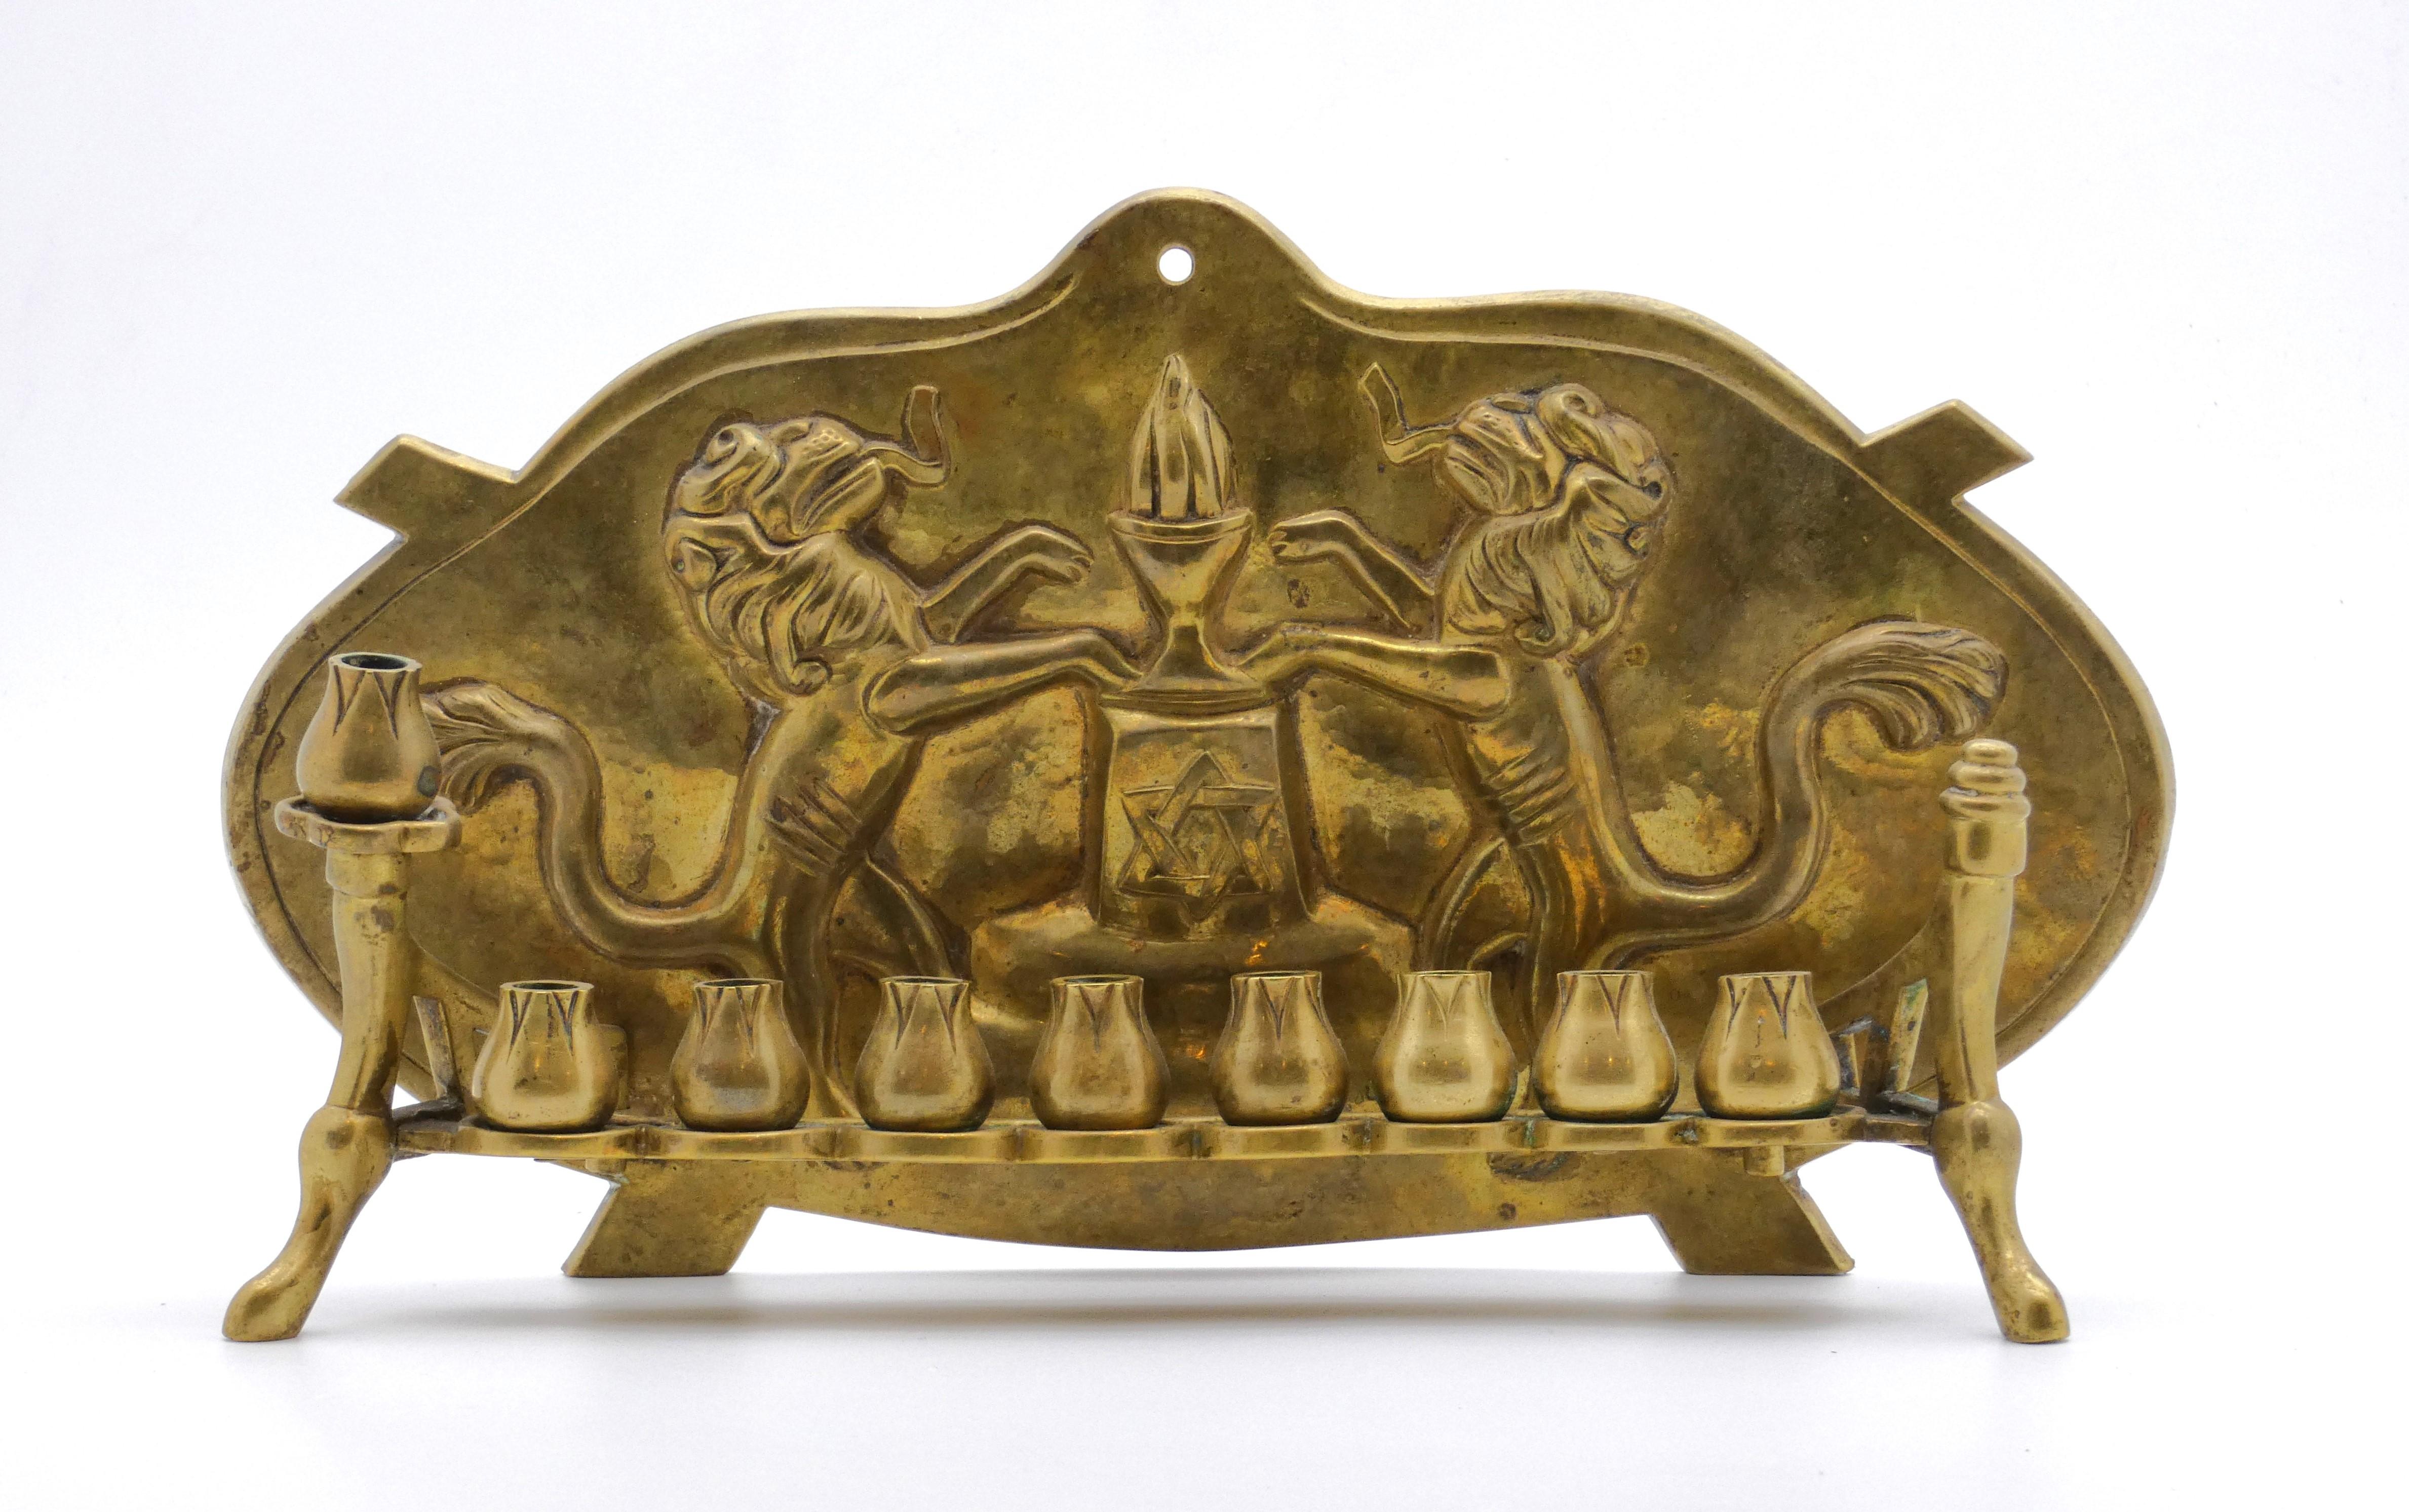 This splendid German Hanukkah Lamp suggests the Arts and Crafts style or even the unique Art Nouveau fashion. 

Backplate presents two rampant Lions of Judah with their tongues protruding, each with an extended front paw resting on a burning incense